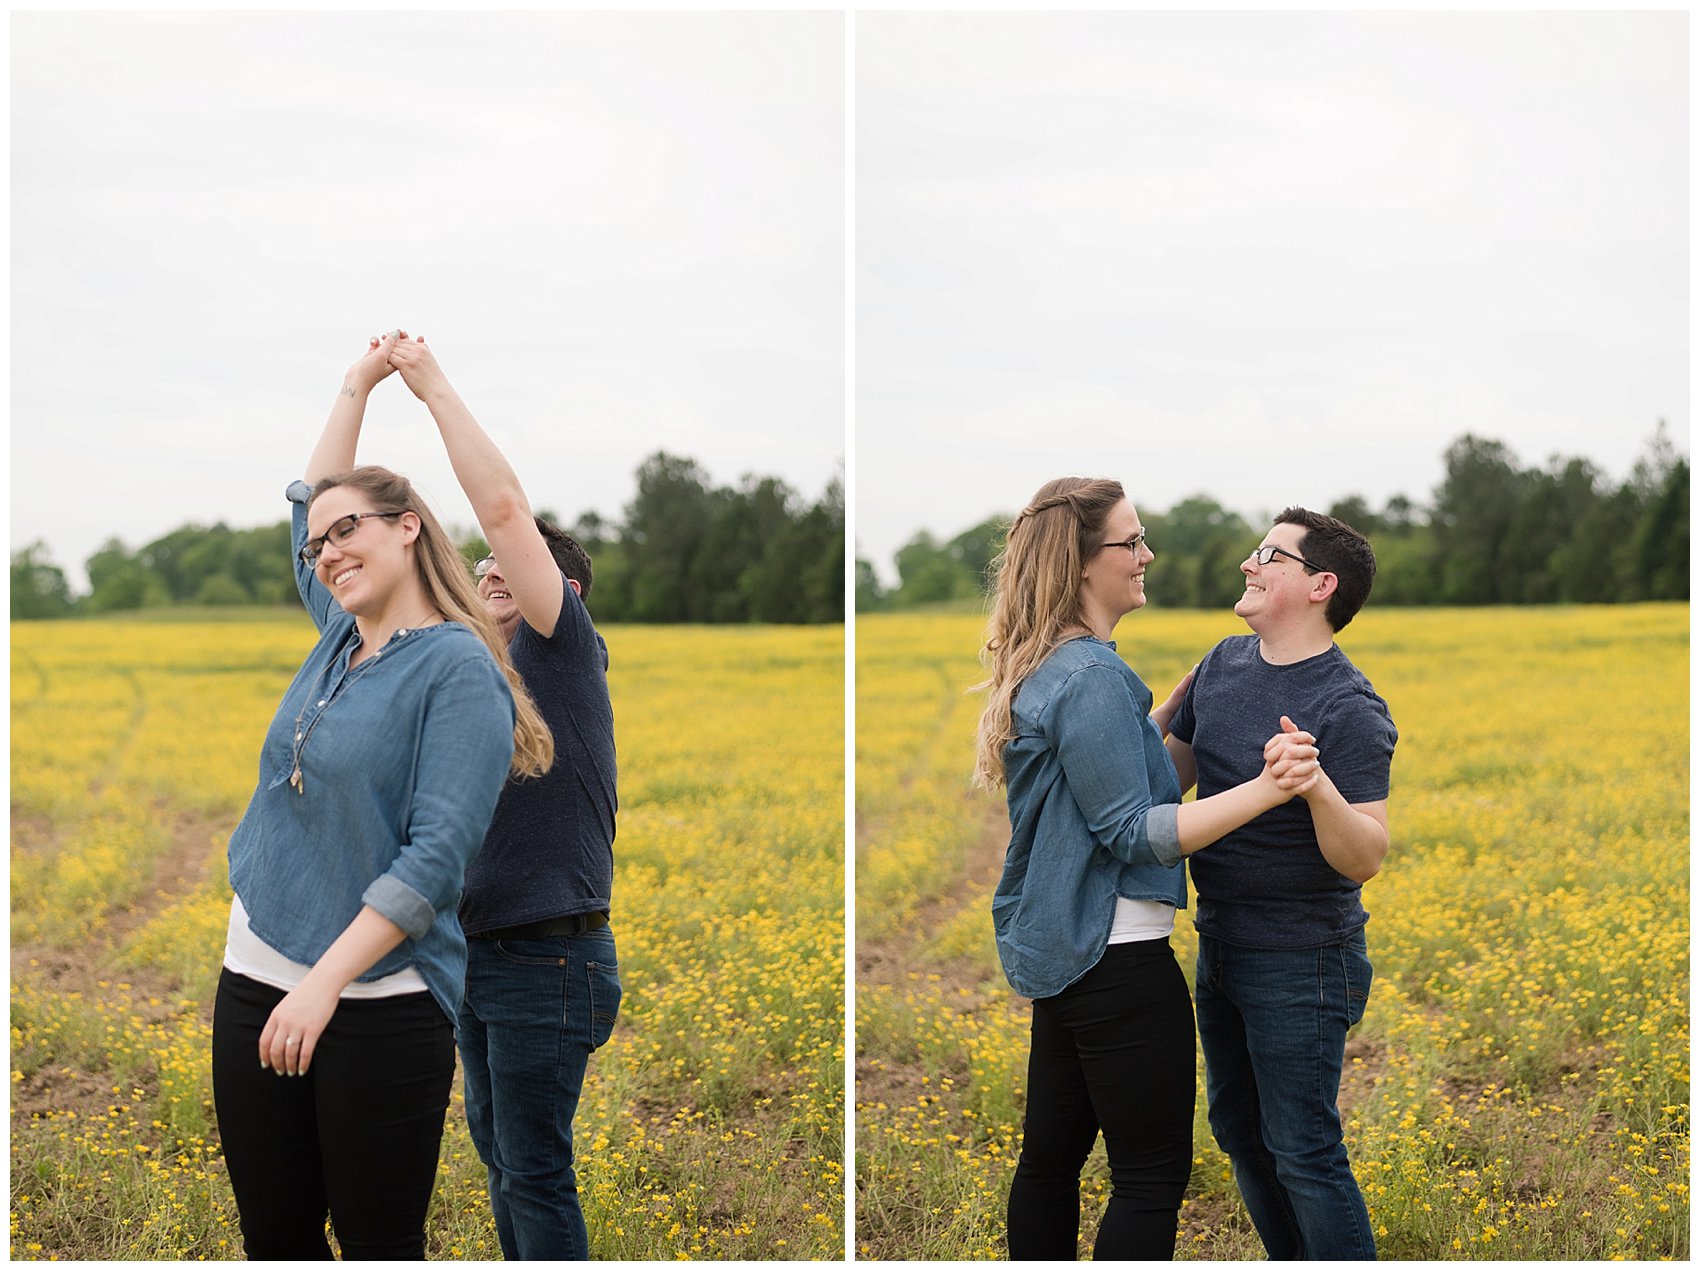 Yellow Field Suffolk Virginia Engagement Session_0609